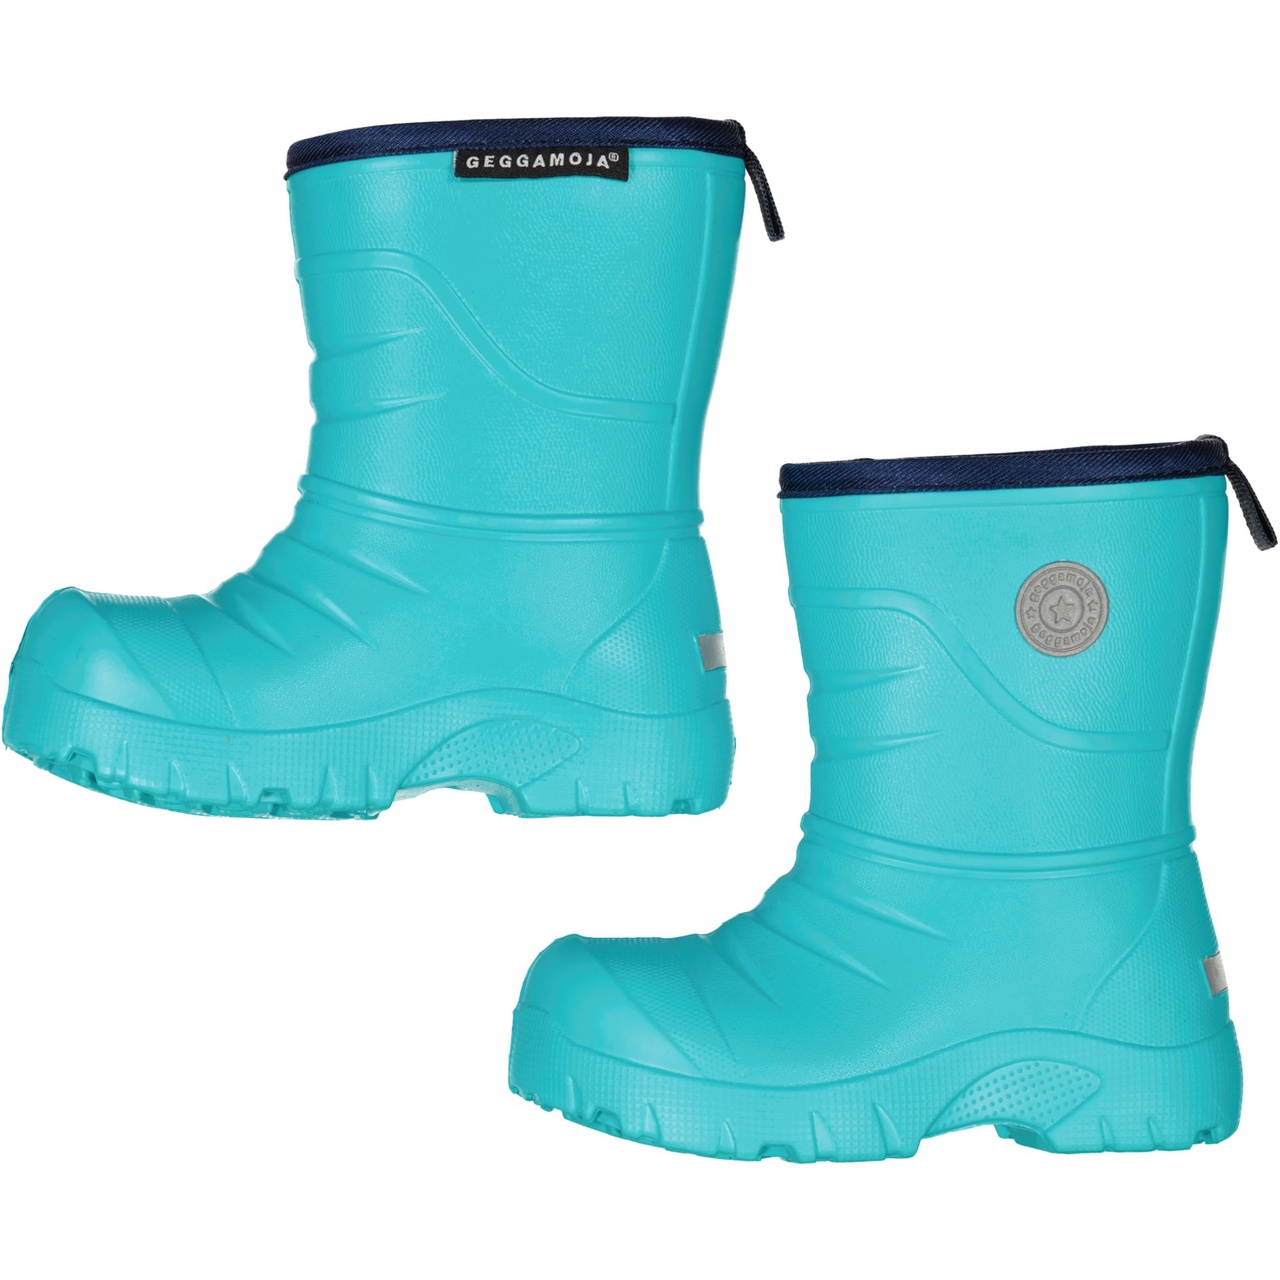 All-weather Boot Turquoise 24